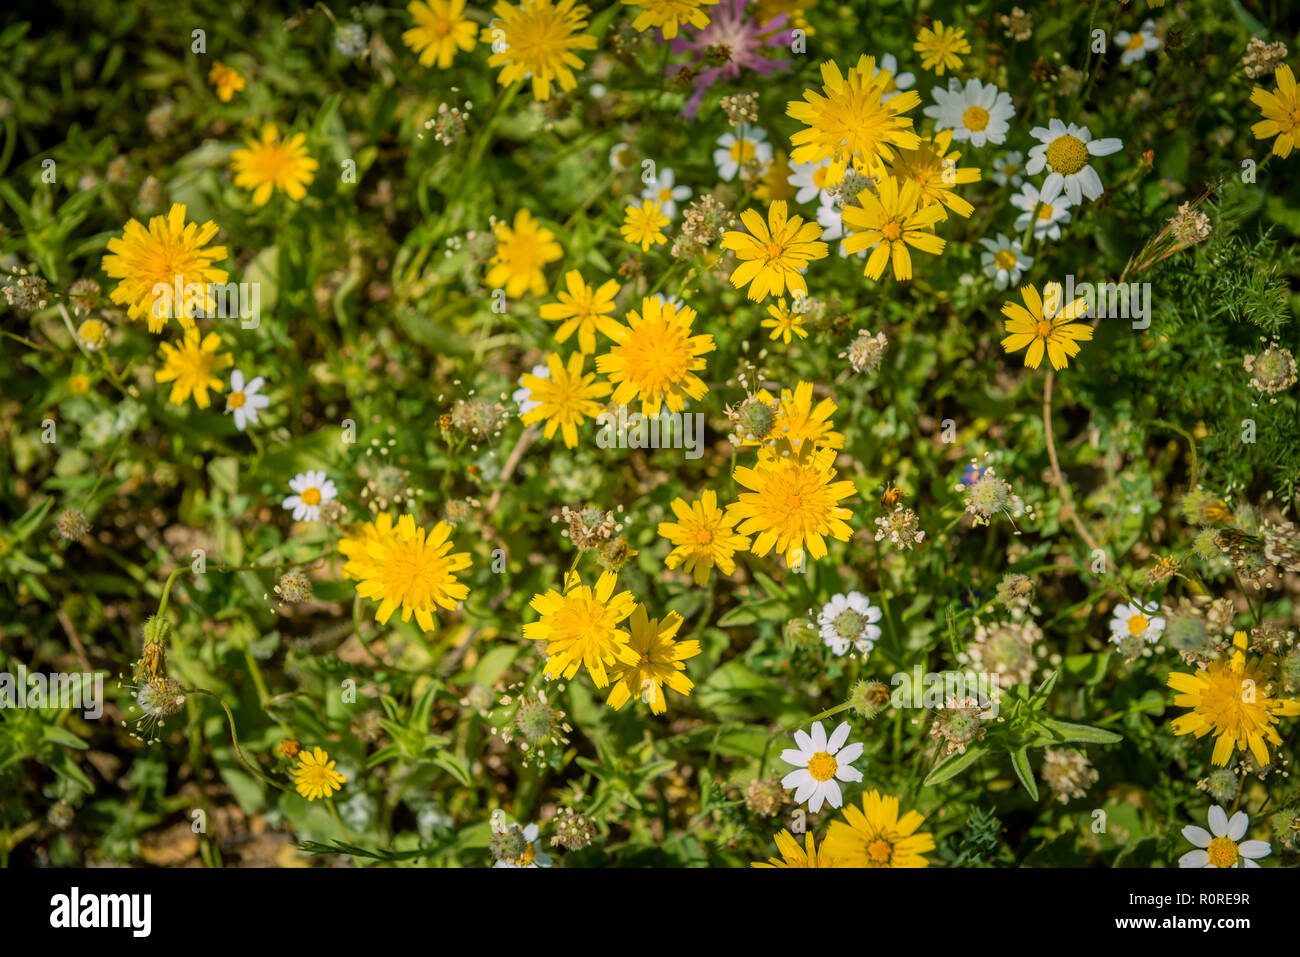 Blooming flower meadow, dandelions (Taraxacum officinale) and common daisies (Bellis perennis), Andalusia, Spain Stock Photo